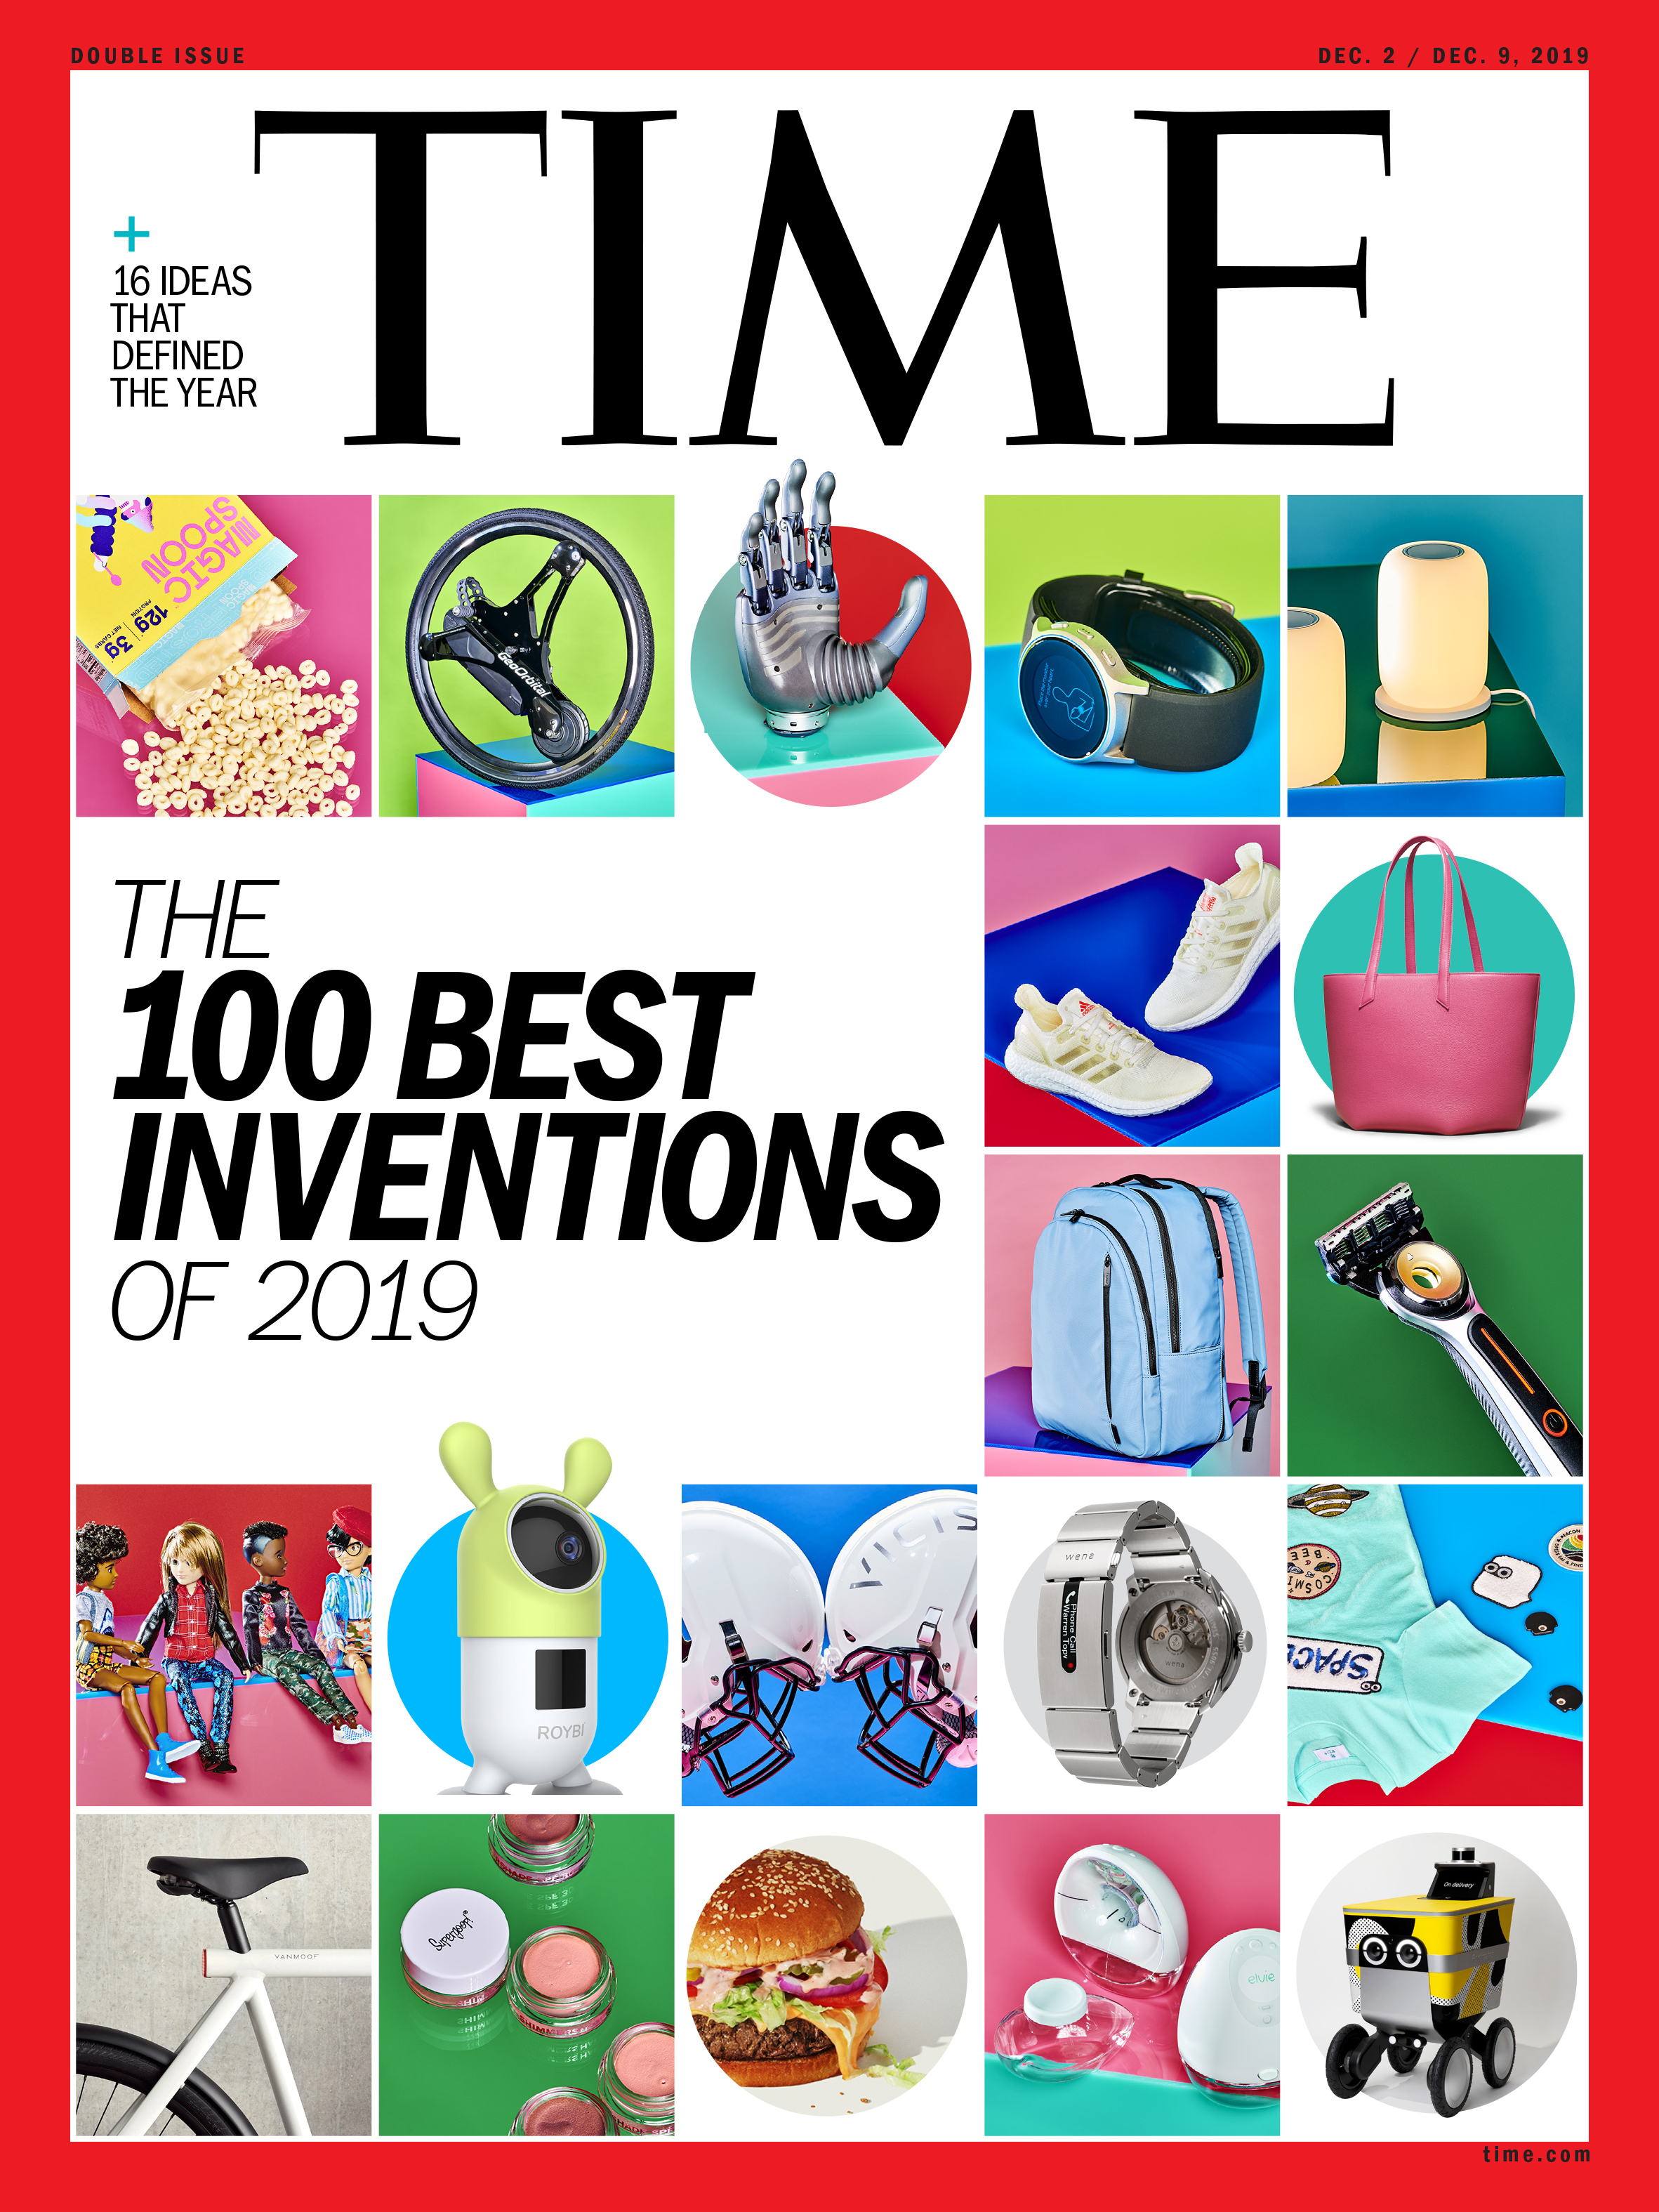 besøgende sikkerhedsstillelse Vend om Roybi Robot Is Featured On The Cover of TIME Magazine As One Of The Best  Inventions of 2019 | Business Wire